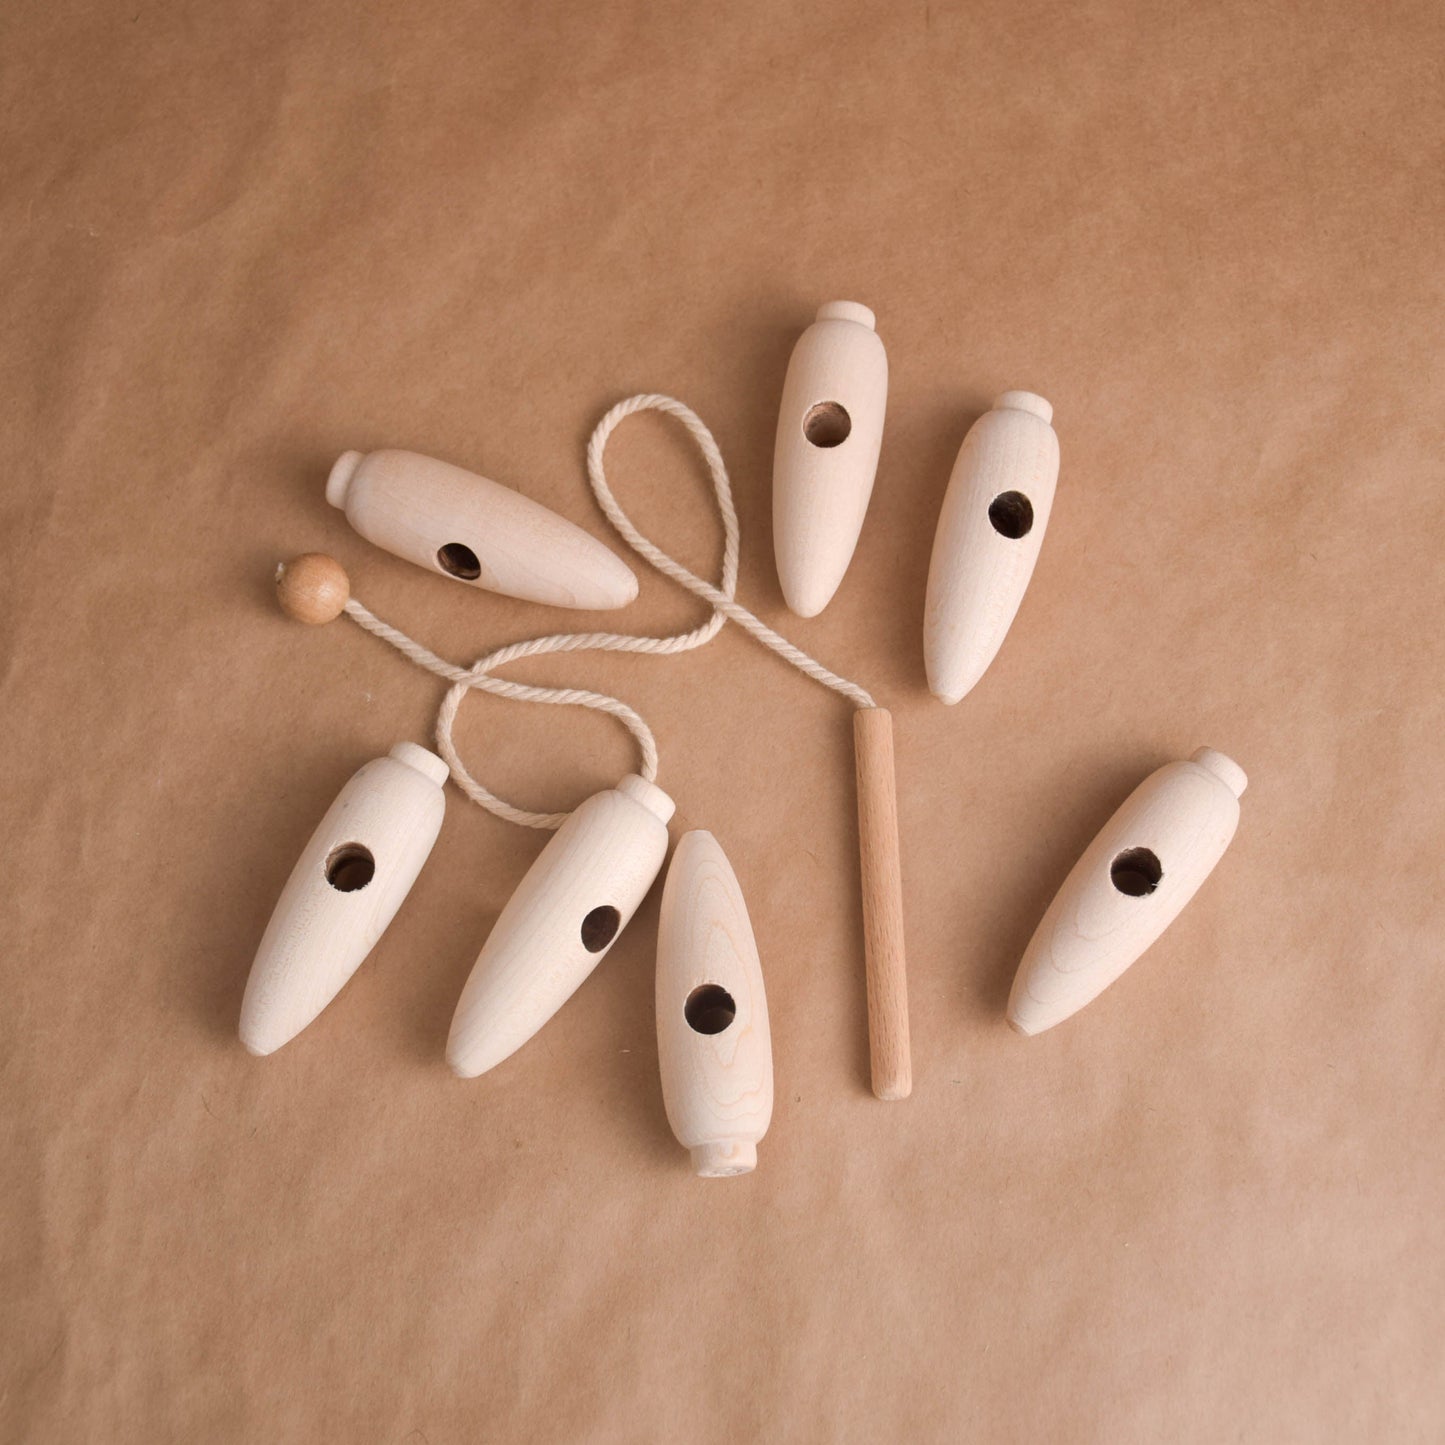 Wood Lacing Toy Carrot